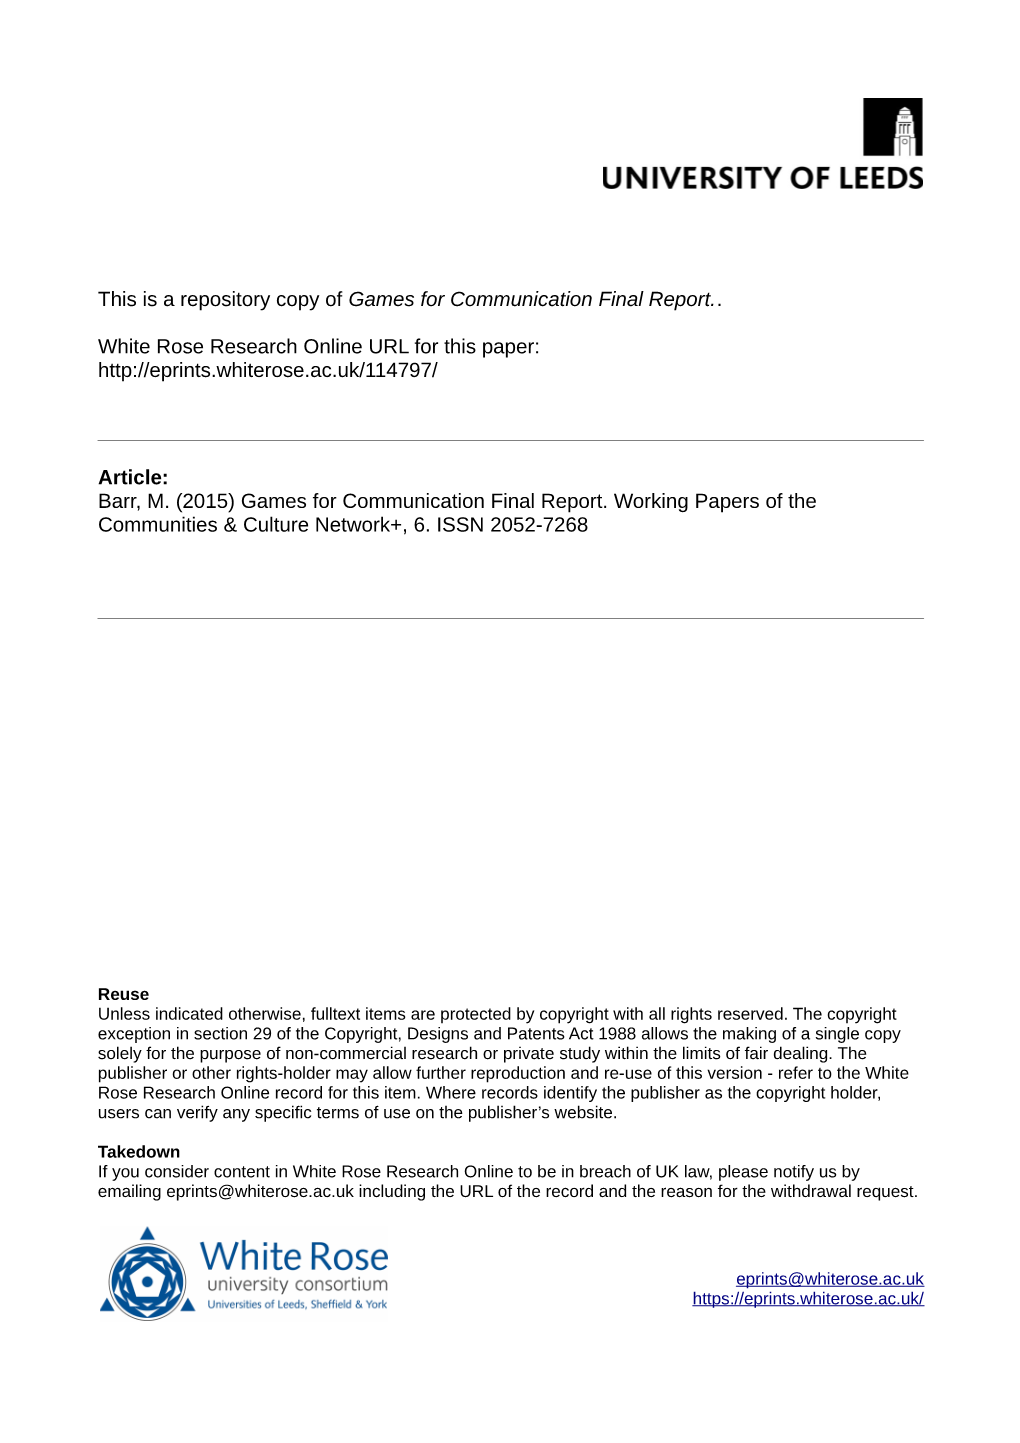 Games for Communication Final Report